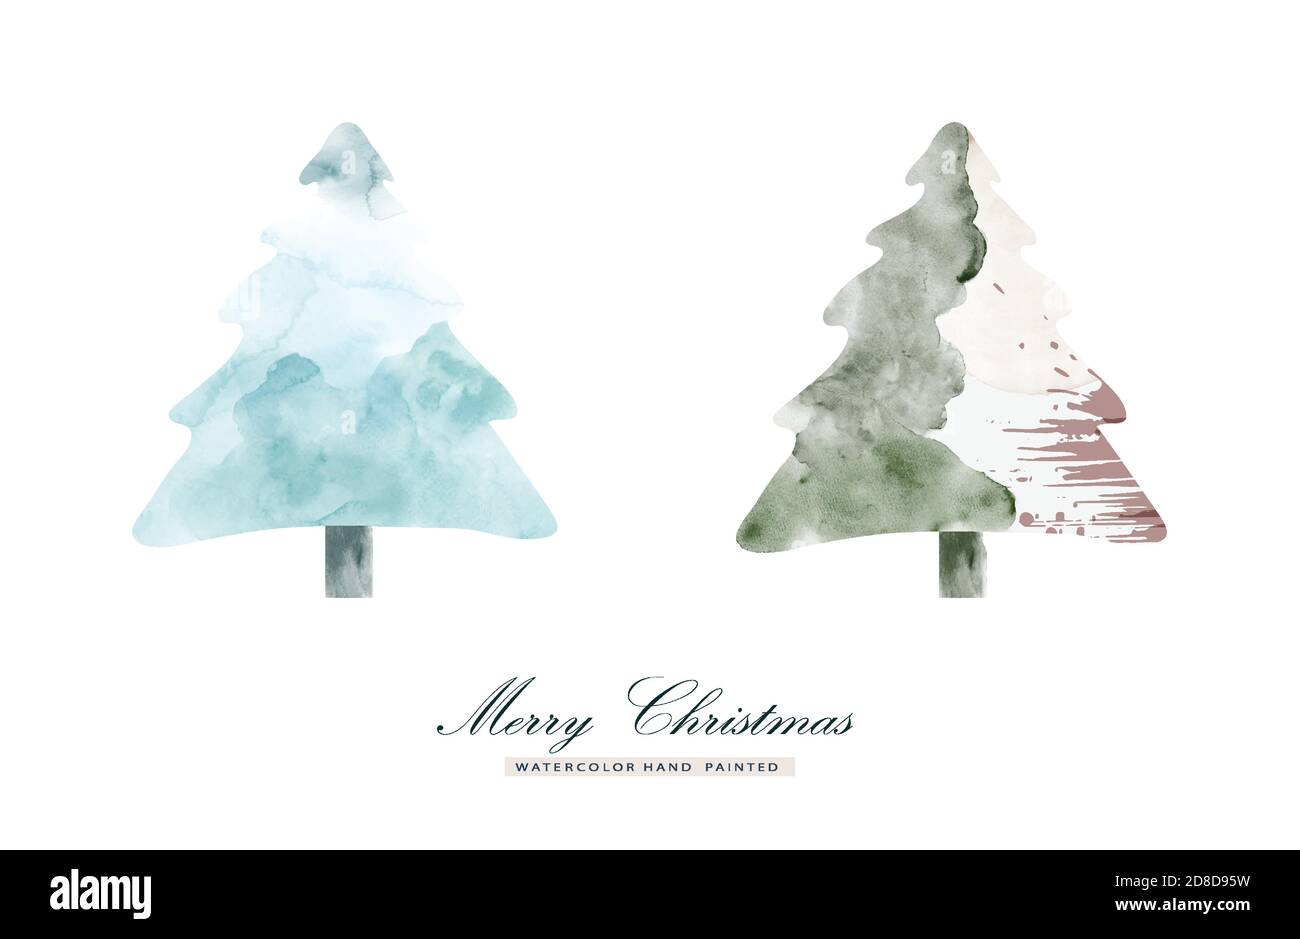 Set of Christmas trees stain watercolor hand painted for creating greeting cards. Art minimal style elements isolated on a white background for your d Stock Vector